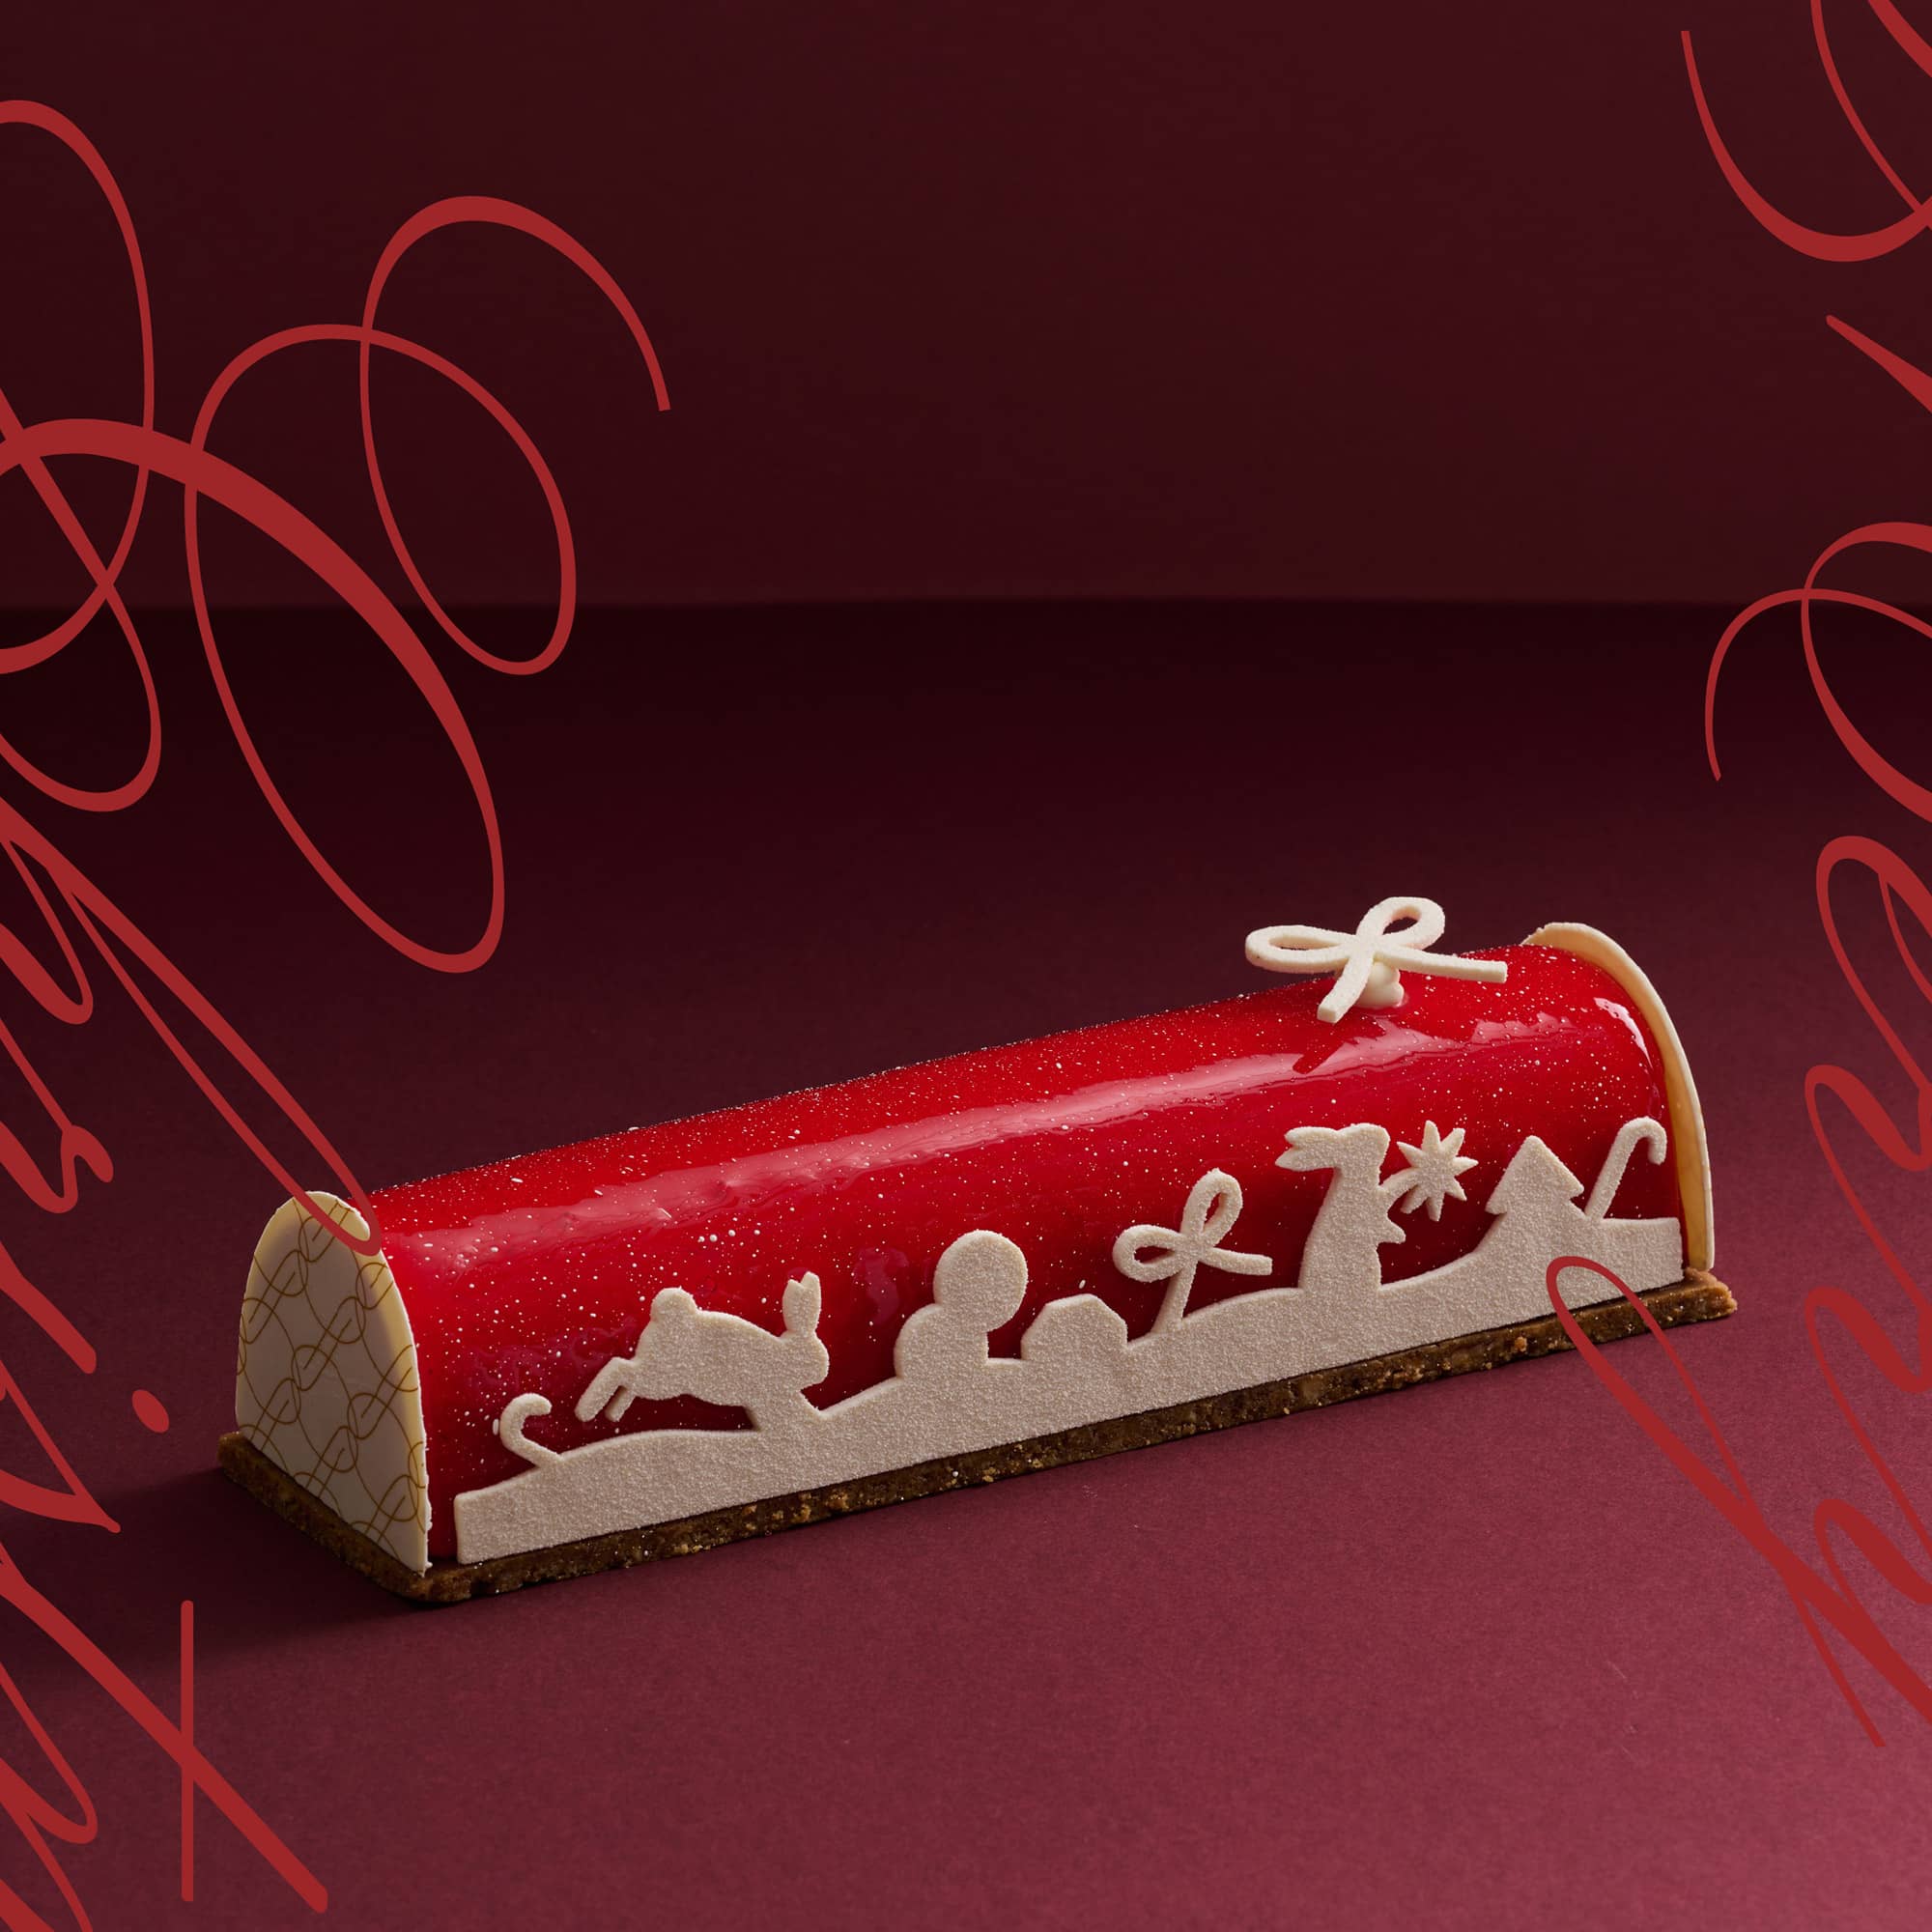 A Red Berries Fromage Blanc cake as this year's 2023 Christmas log cake coated in red glaze and decorated with Christmas themed white chocolate